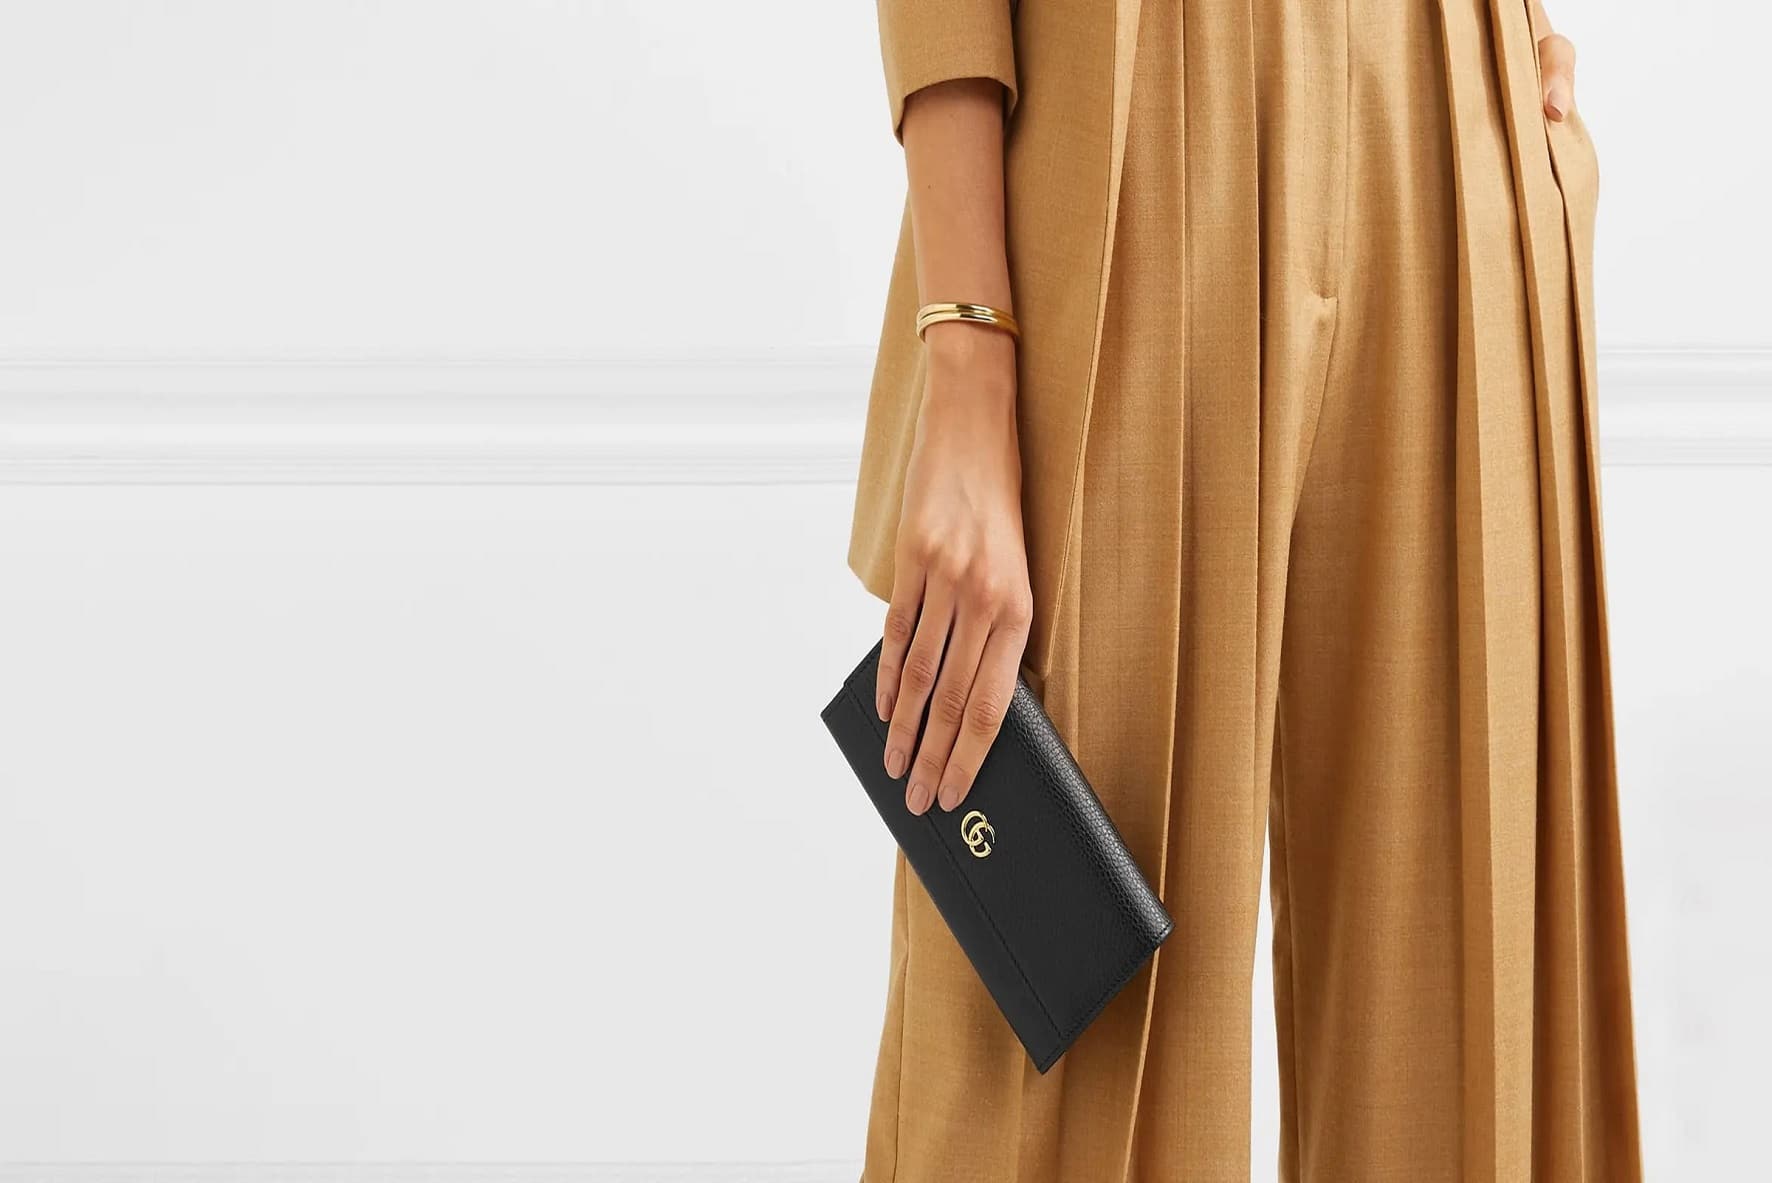 5 Types of Women's Wallets For Everyday Use